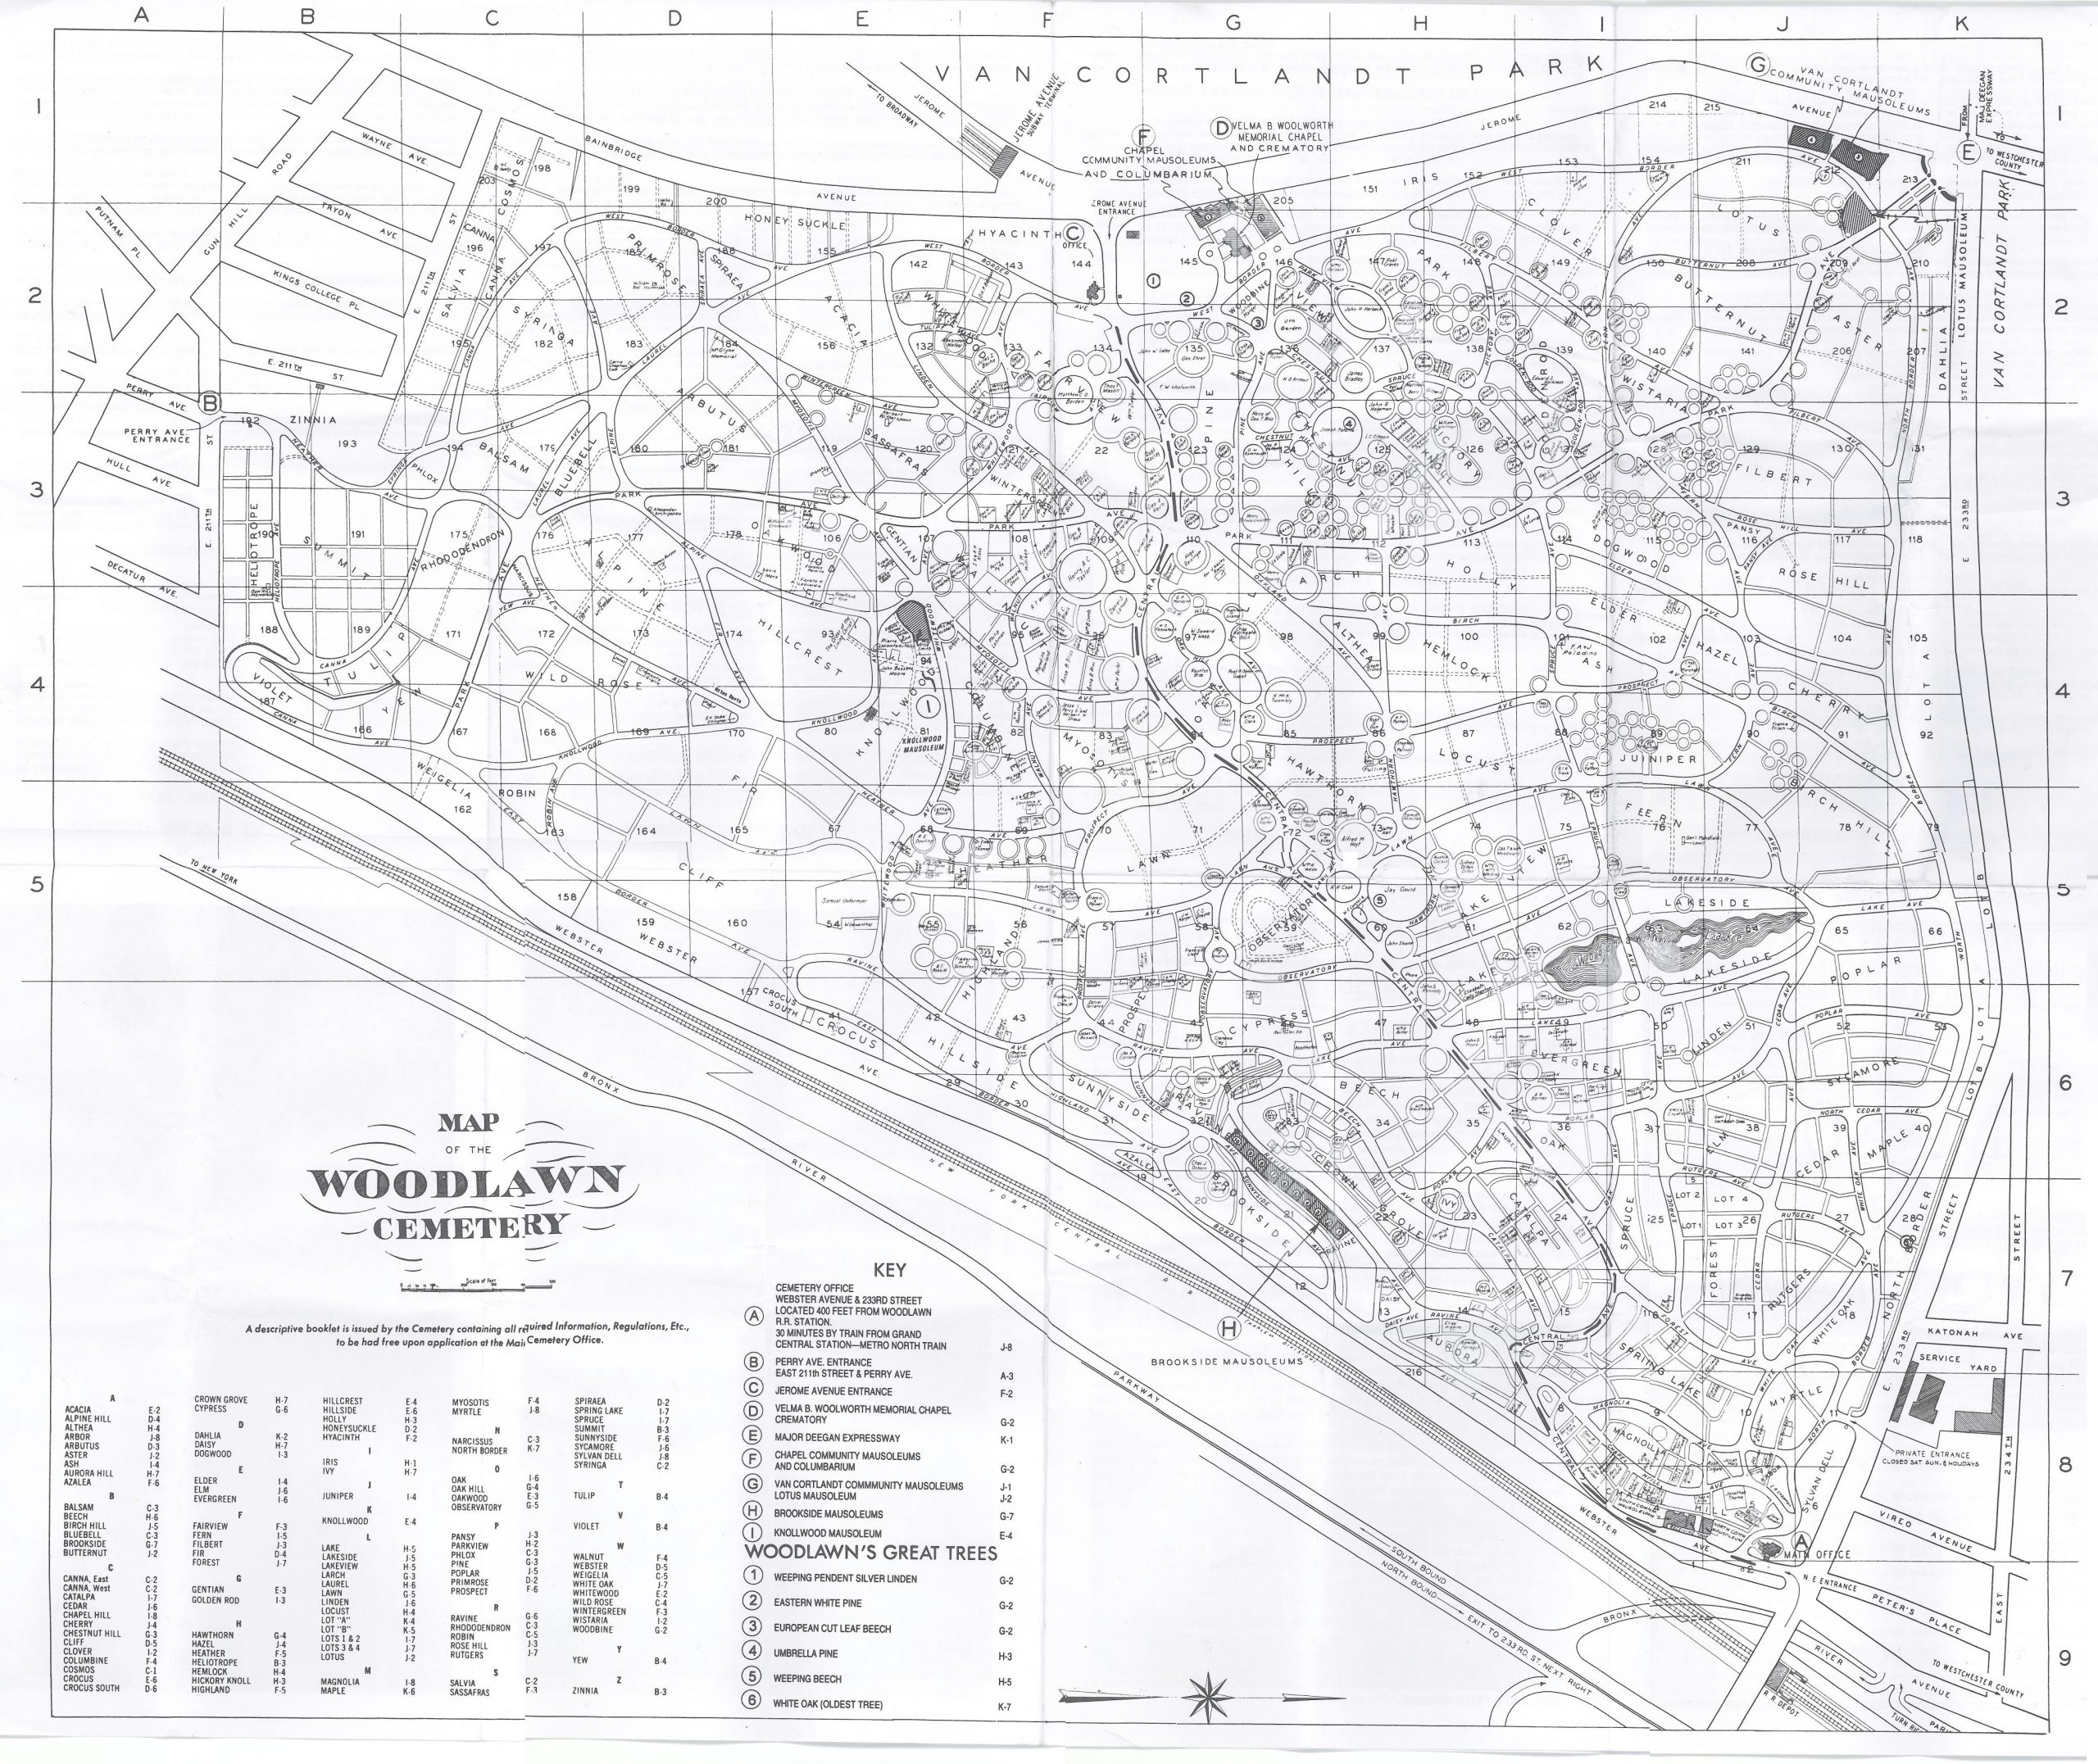 Cemetery map of Woodlawn Cemetery in the Bronx in New York City